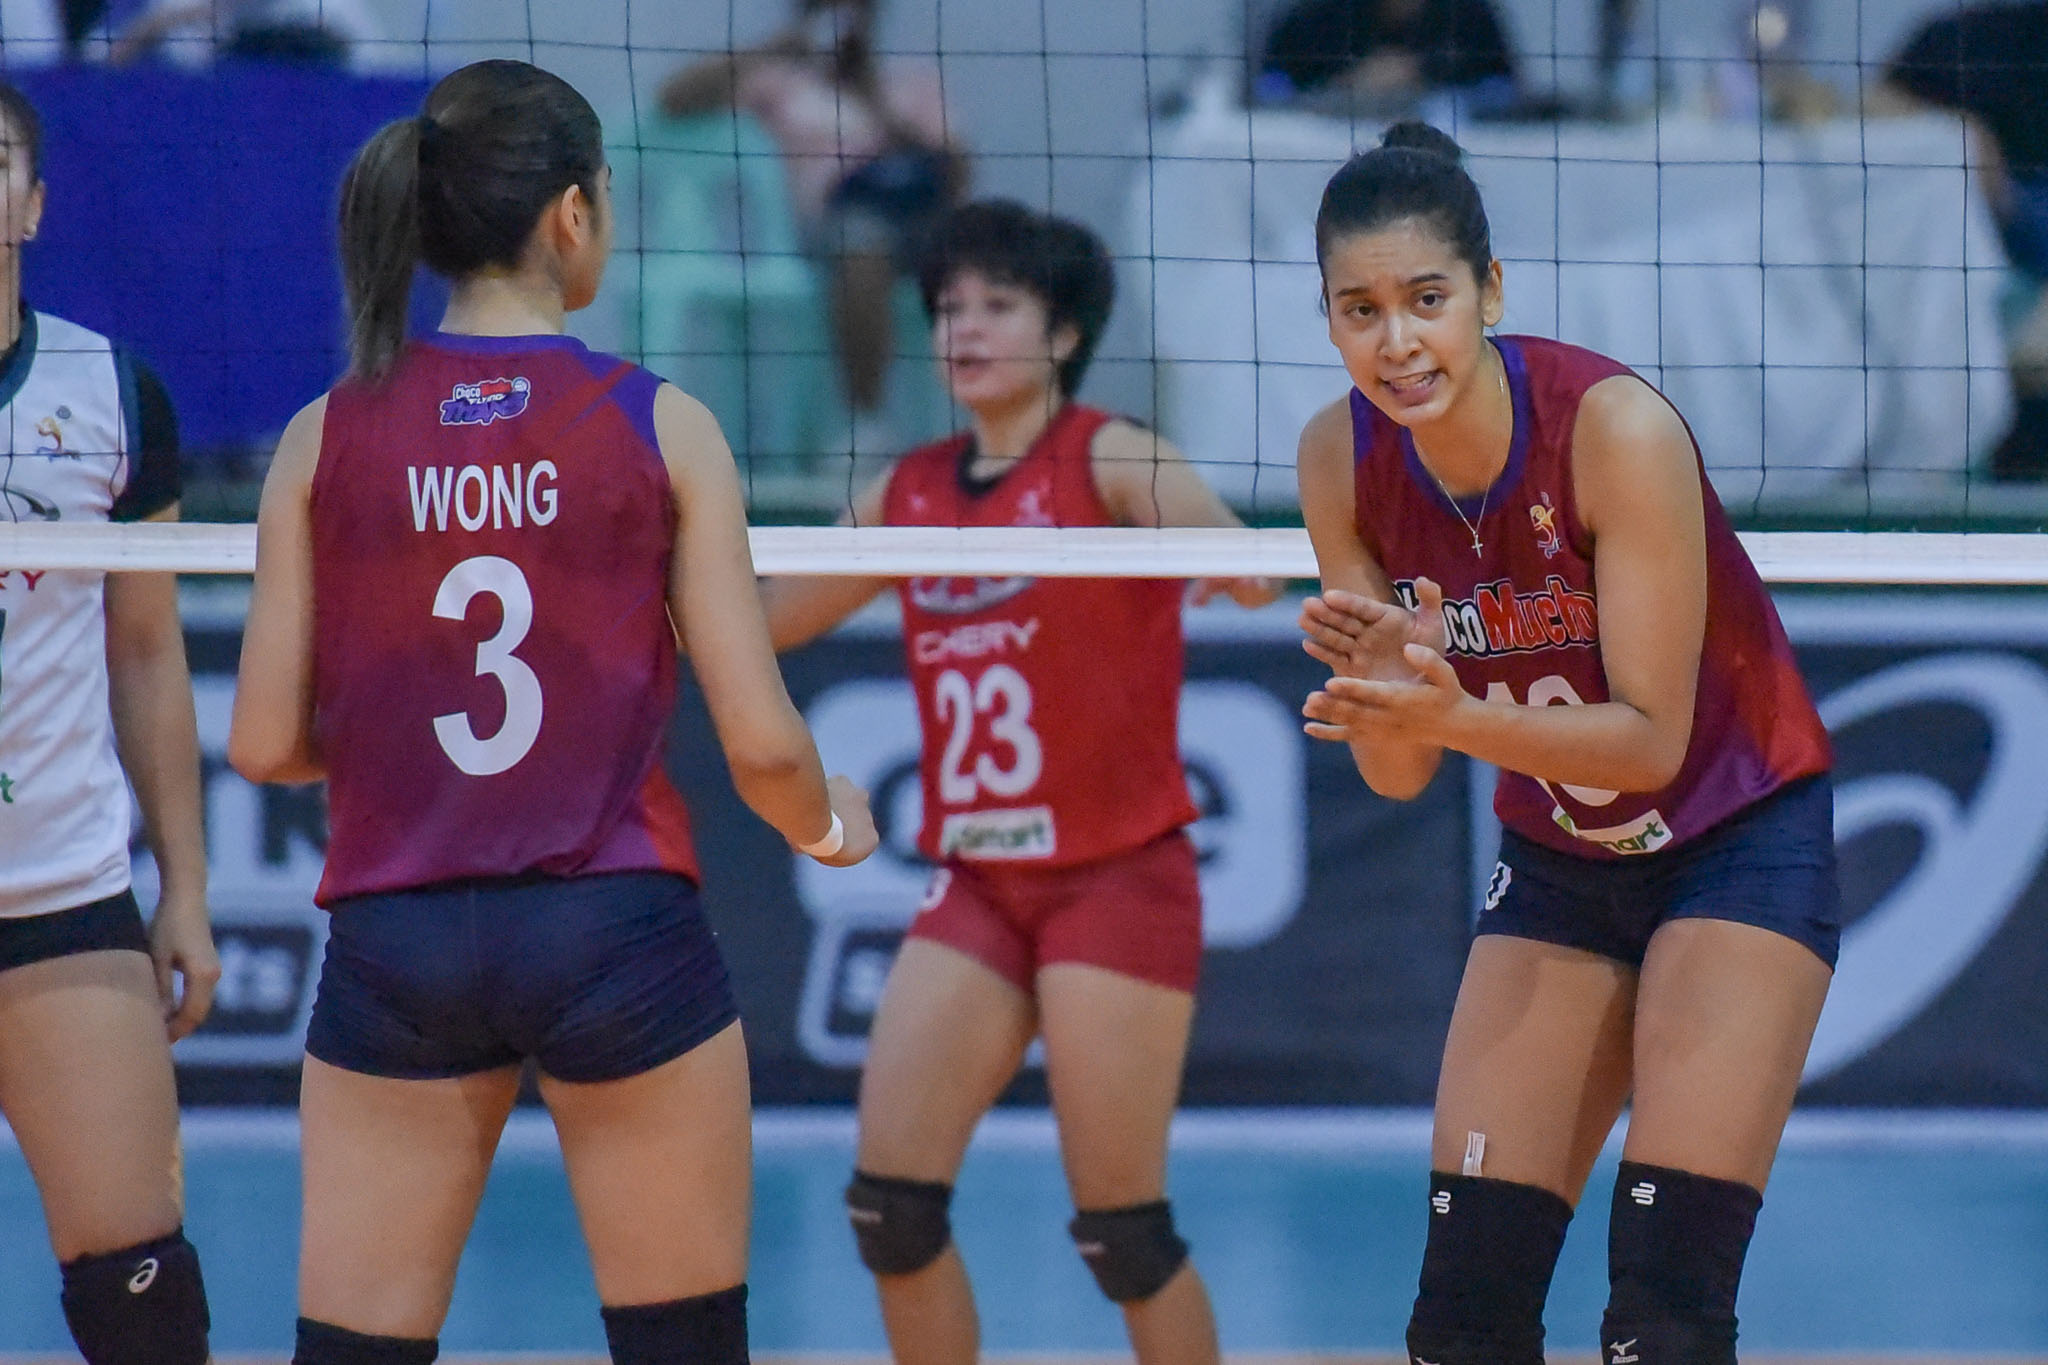 2021-PVL-Open-Chery-Tiggo-vs.-Choco-Mucho-Semis-G2-Kat-Tolentino-2802 With short turnaround, Almadro reminds Choco Mucho to let go of Game Two loss News PVL Volleyball  - philippine sports news